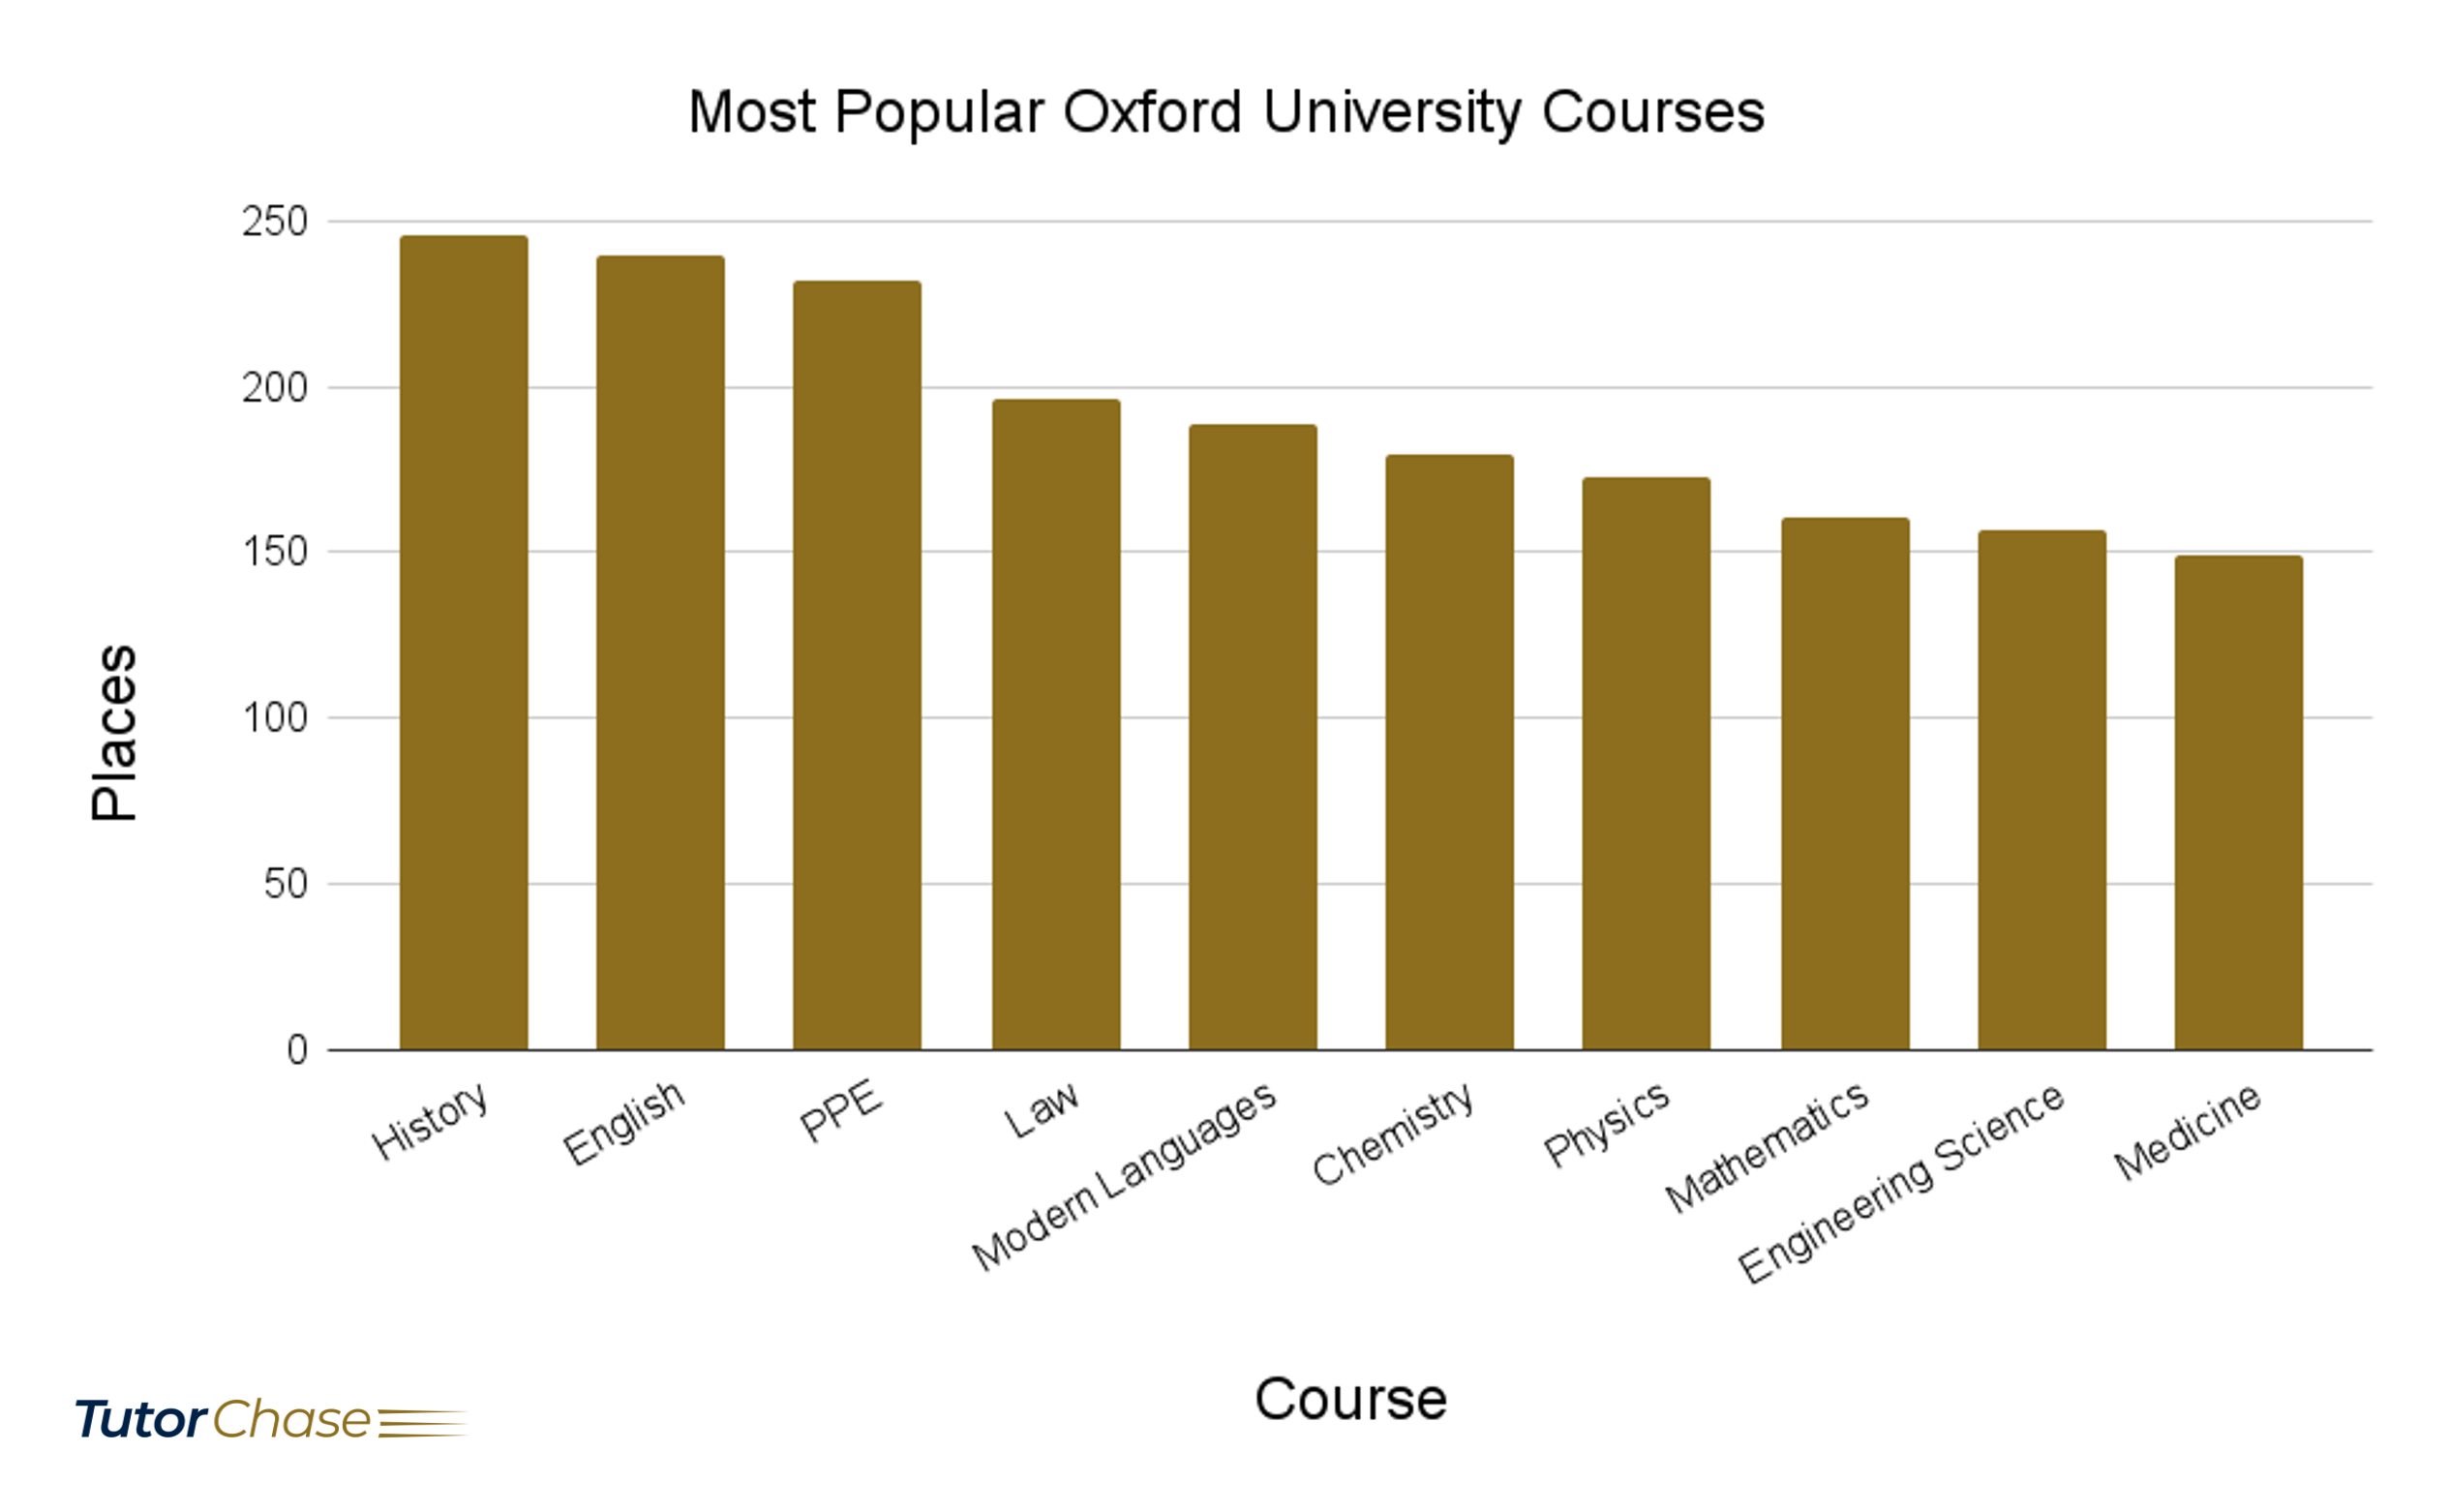 Most popular Oxford courses by number of places